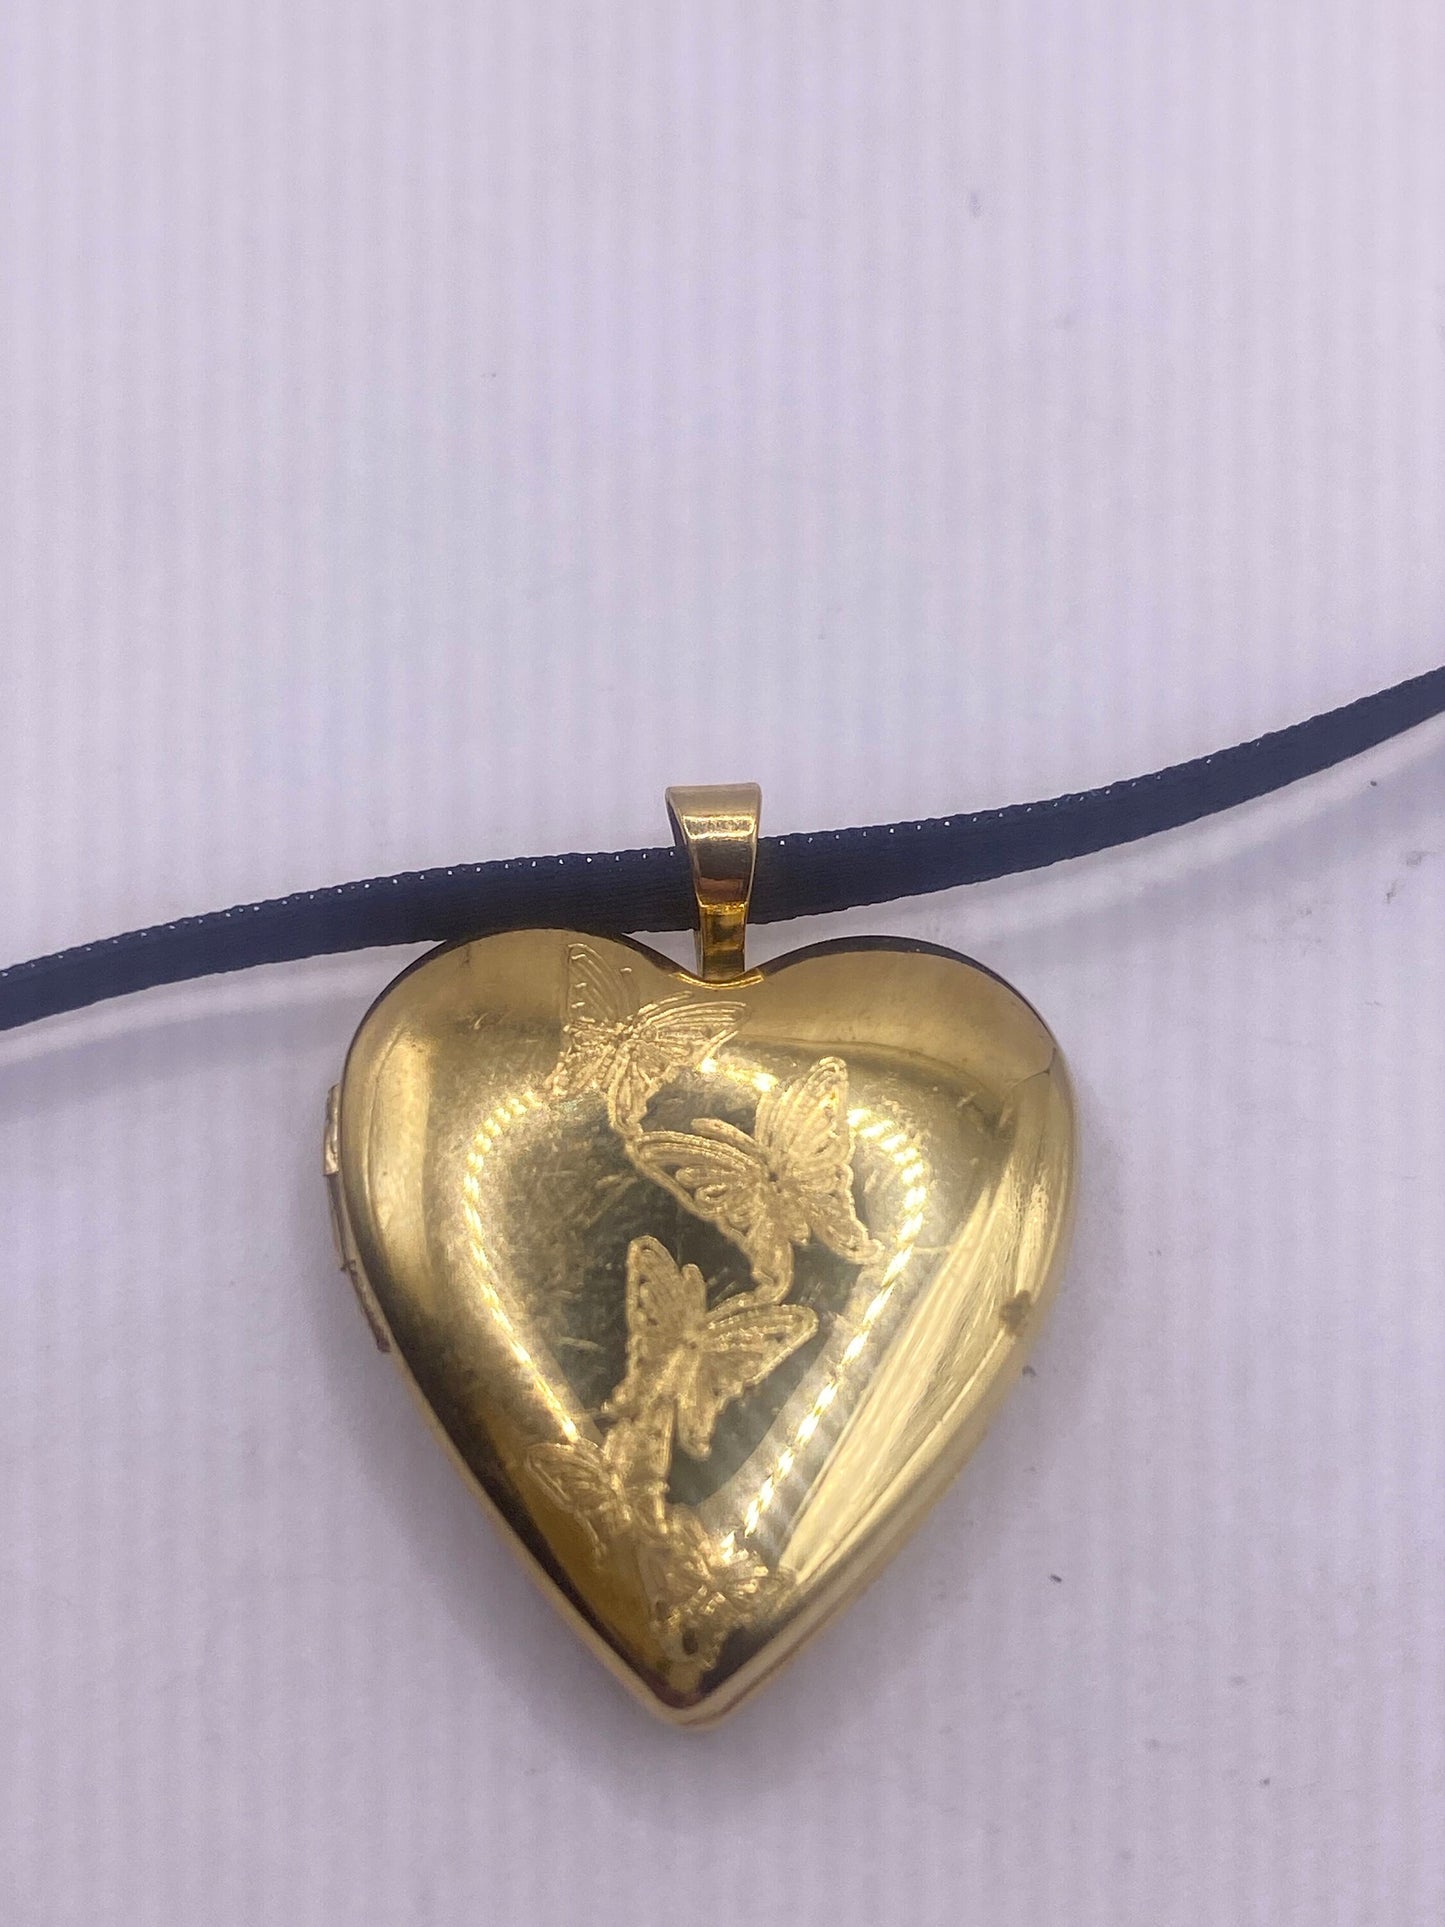 Vintage Gold Locket | Tiny Heart 9k Gold Filled Pendant Photo Memory Charm Engraved Butterfly | Choker Necklace